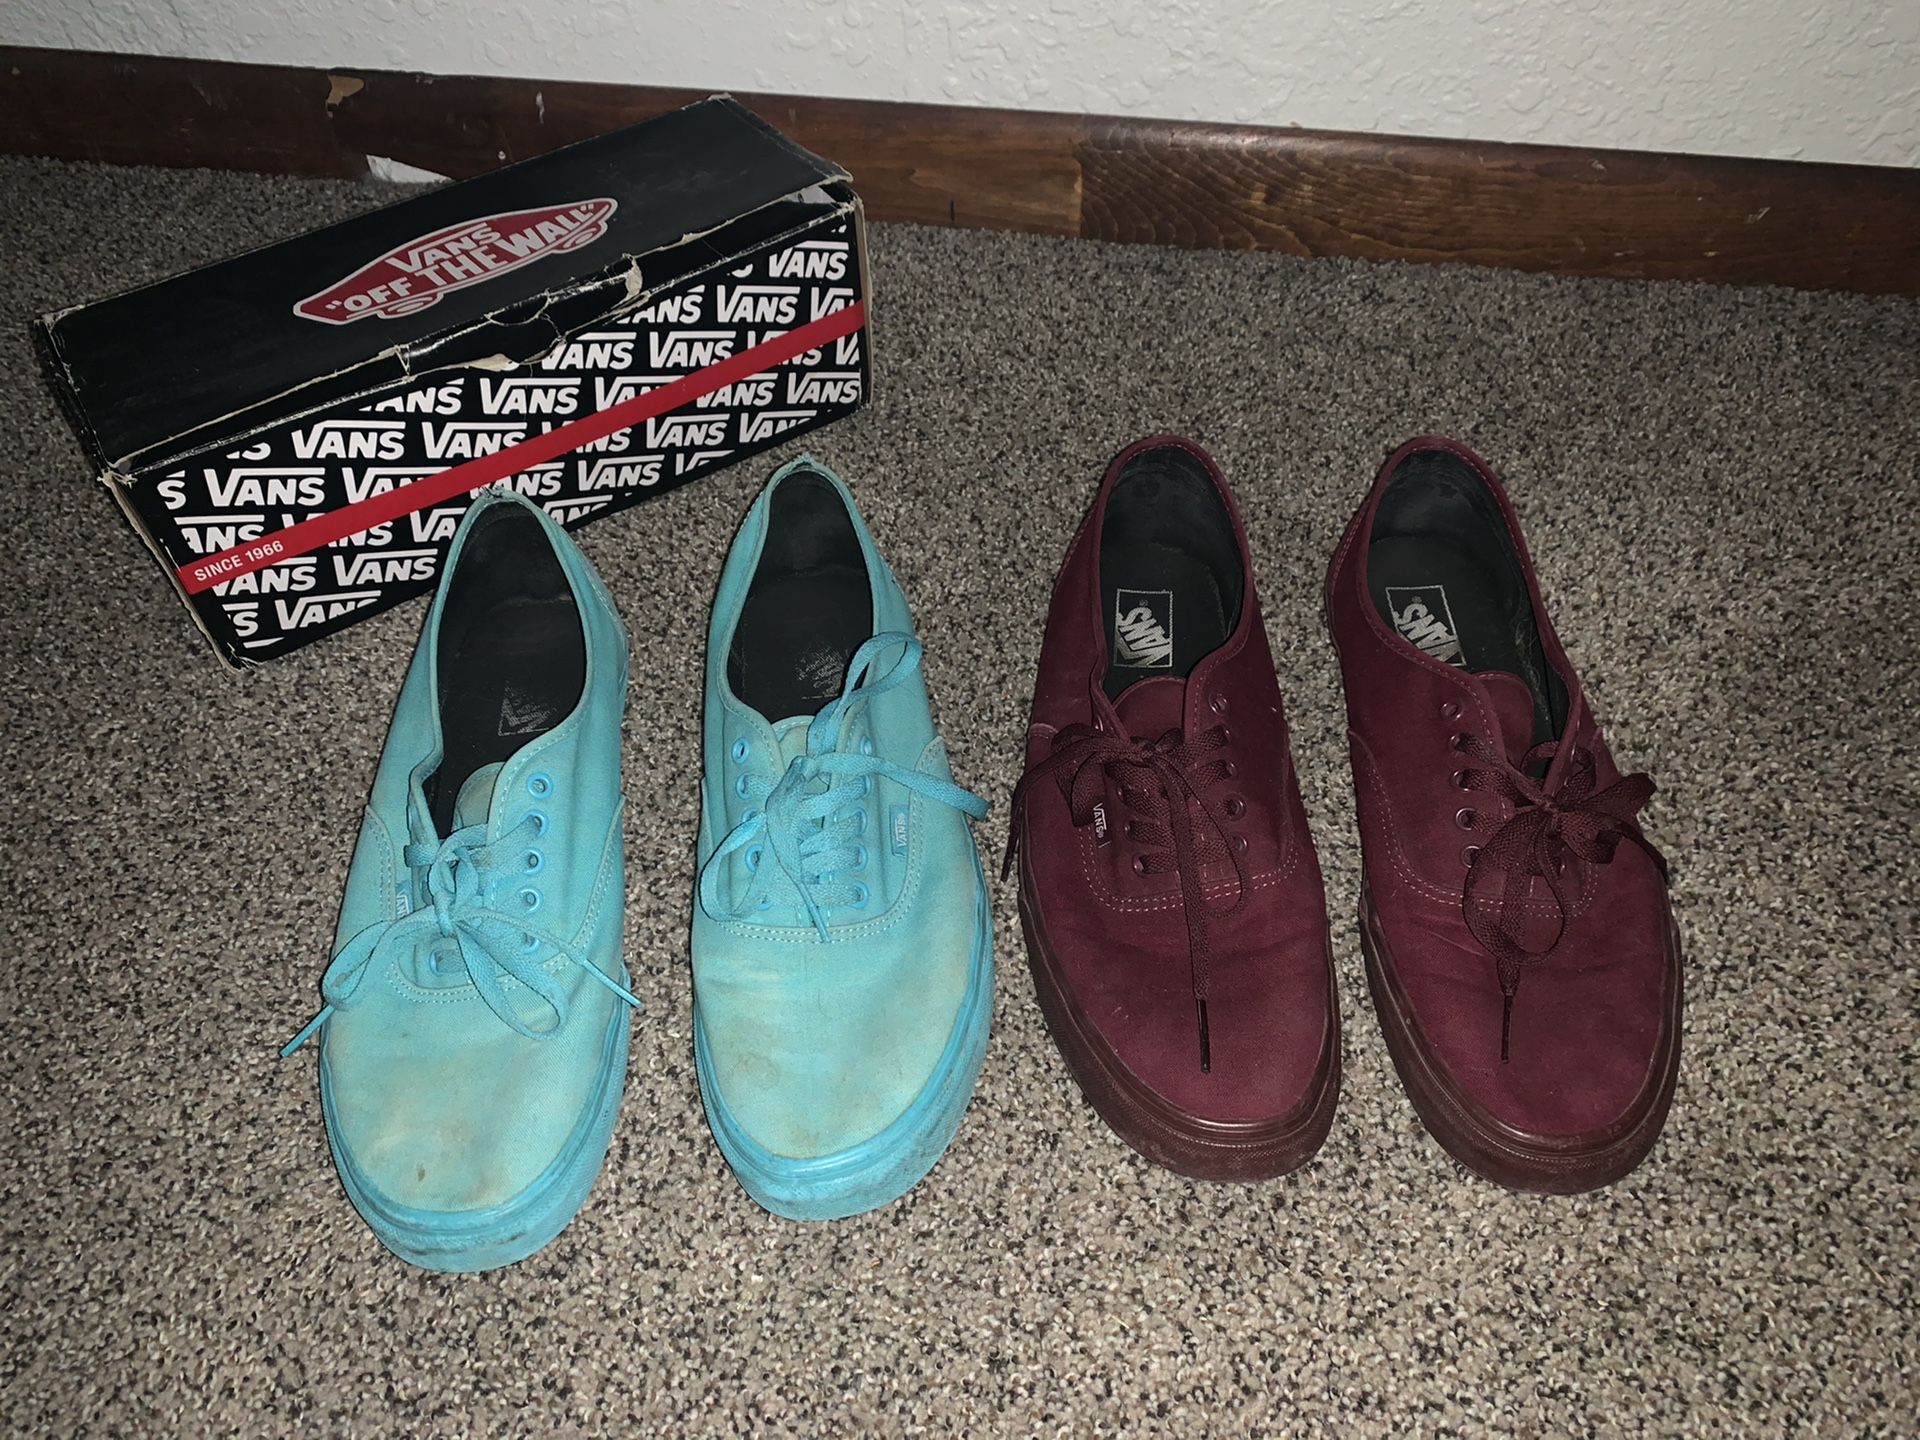 Authentic Teal and Maroon Vans (Size 13) $30